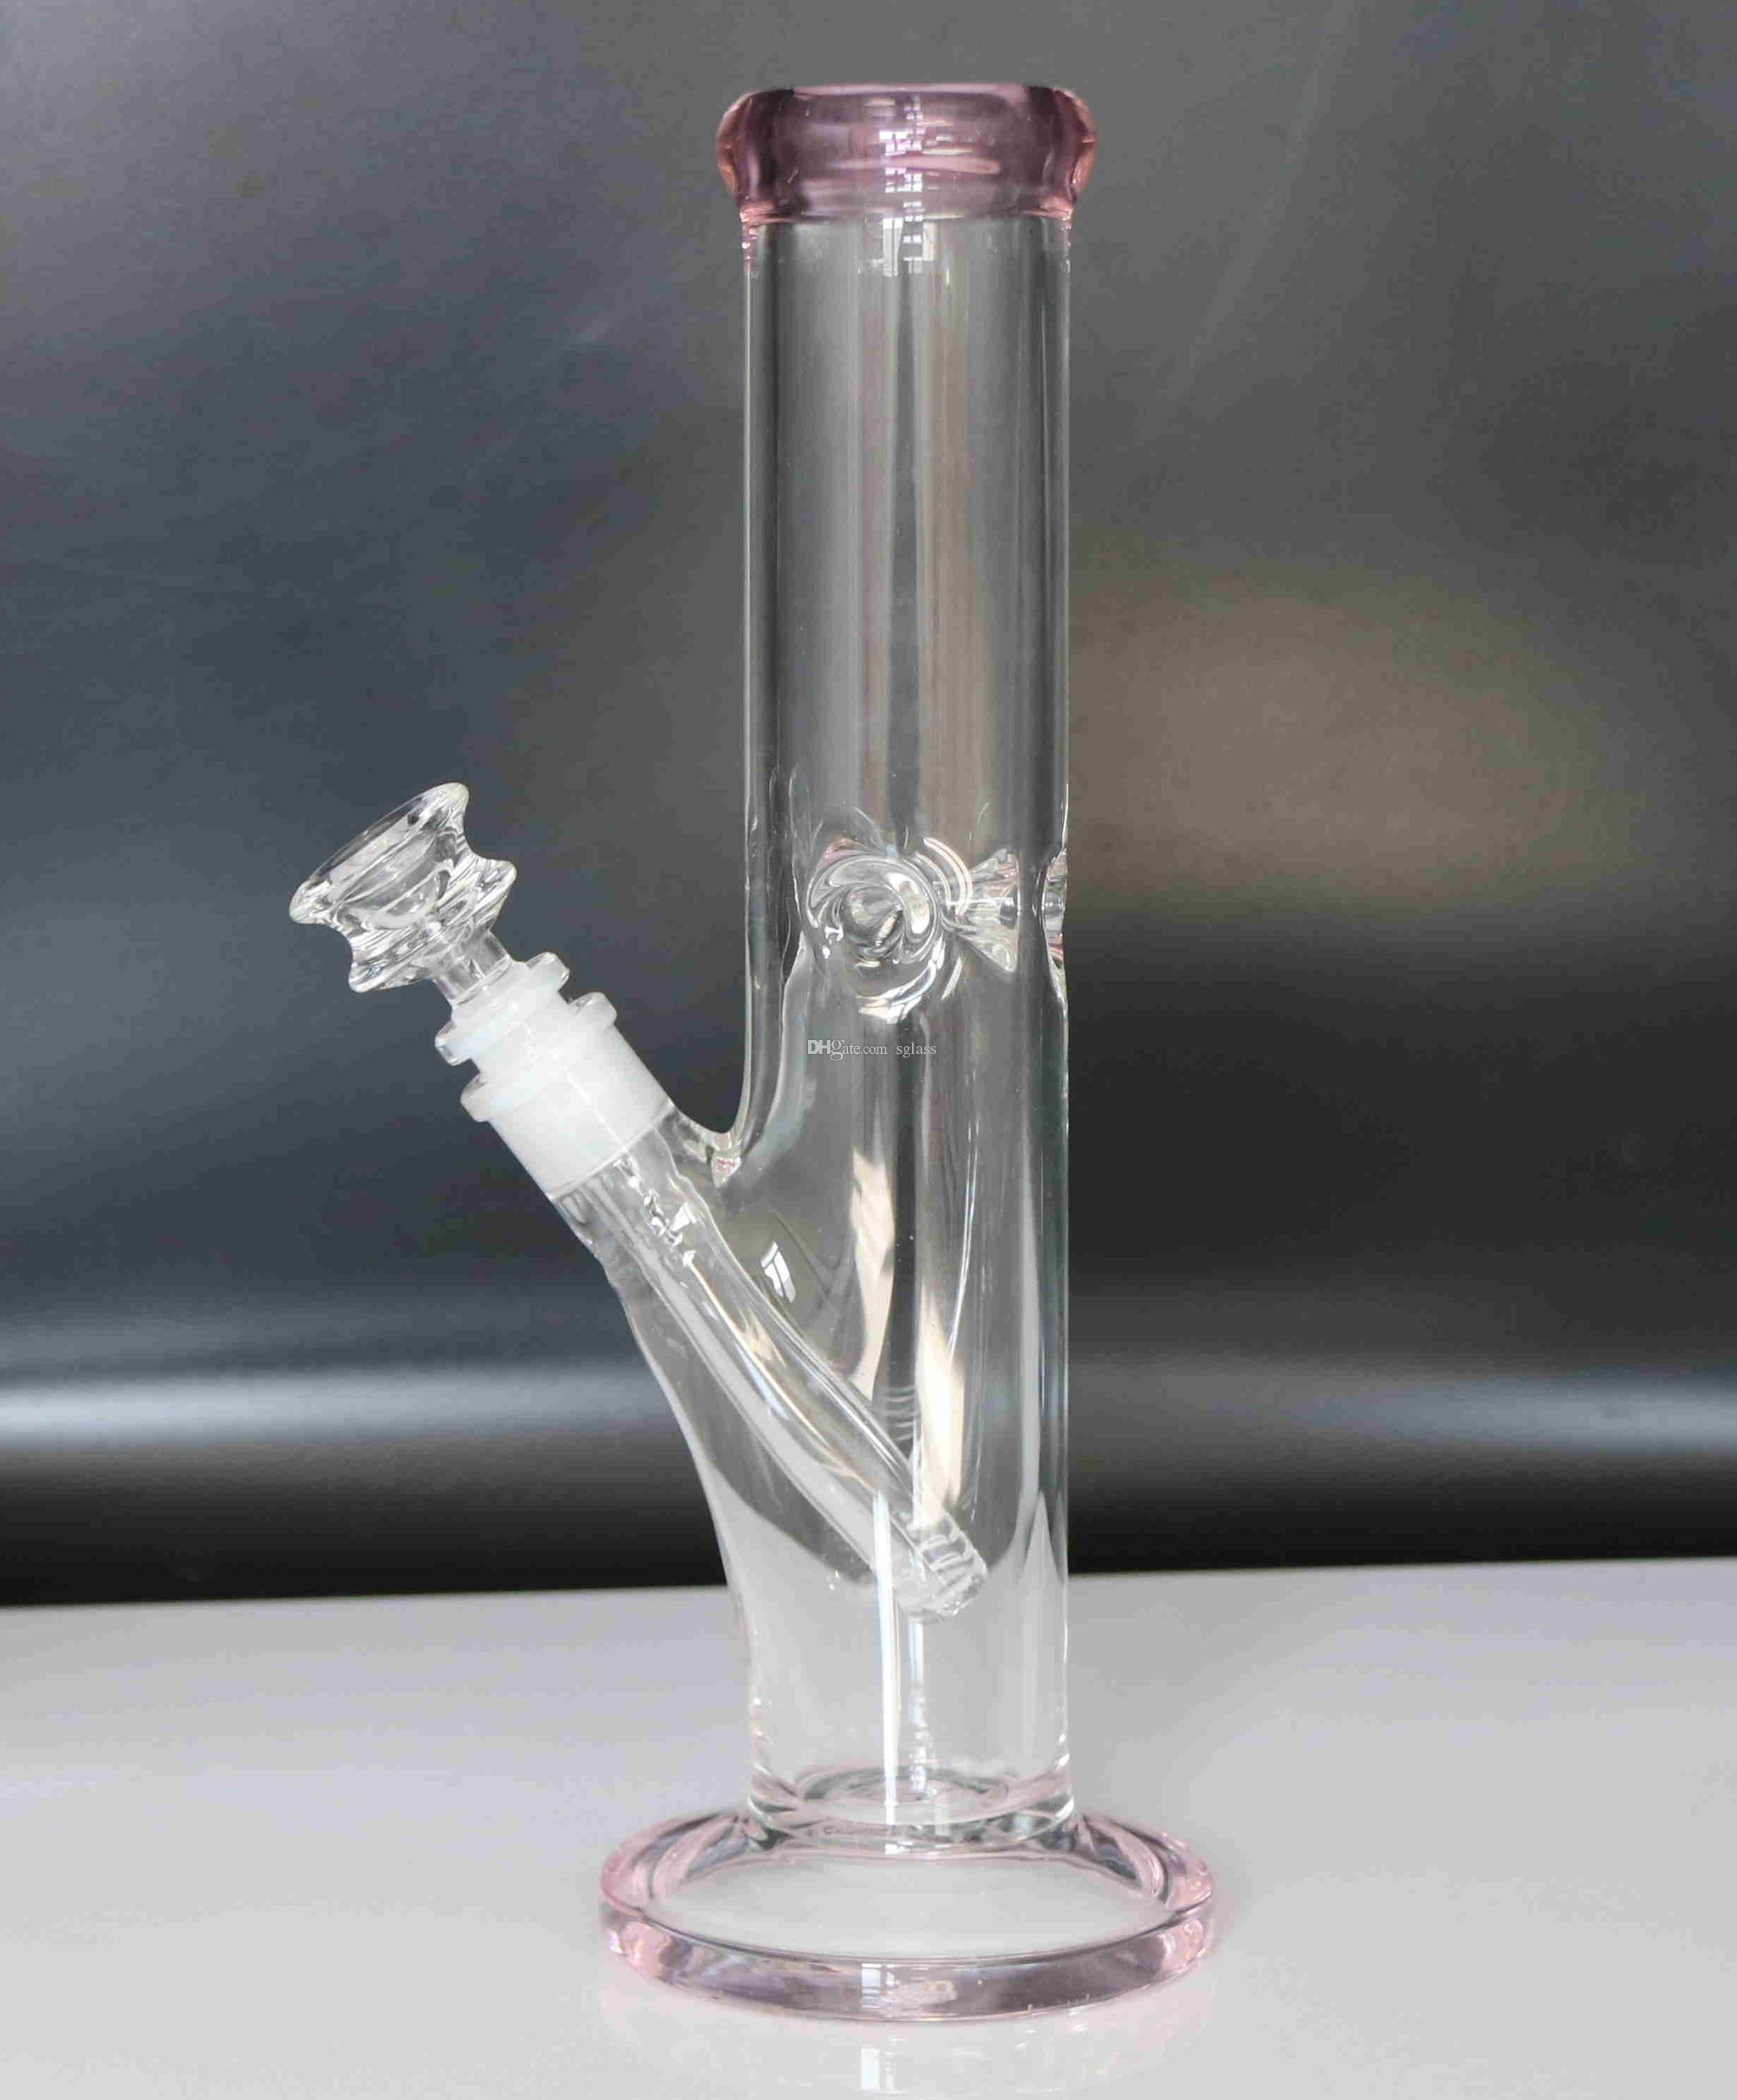 13 Recommended 40 Inch Tall Vases 2024 free download 40 inch tall vases of 2018 7 mm thick glass bong 12 inch 18 mm joint thick and heacy pertaining to 2018 7 mm thick glass bong 12 inch 18 mm joint thick and heacy glass bong foam packing with